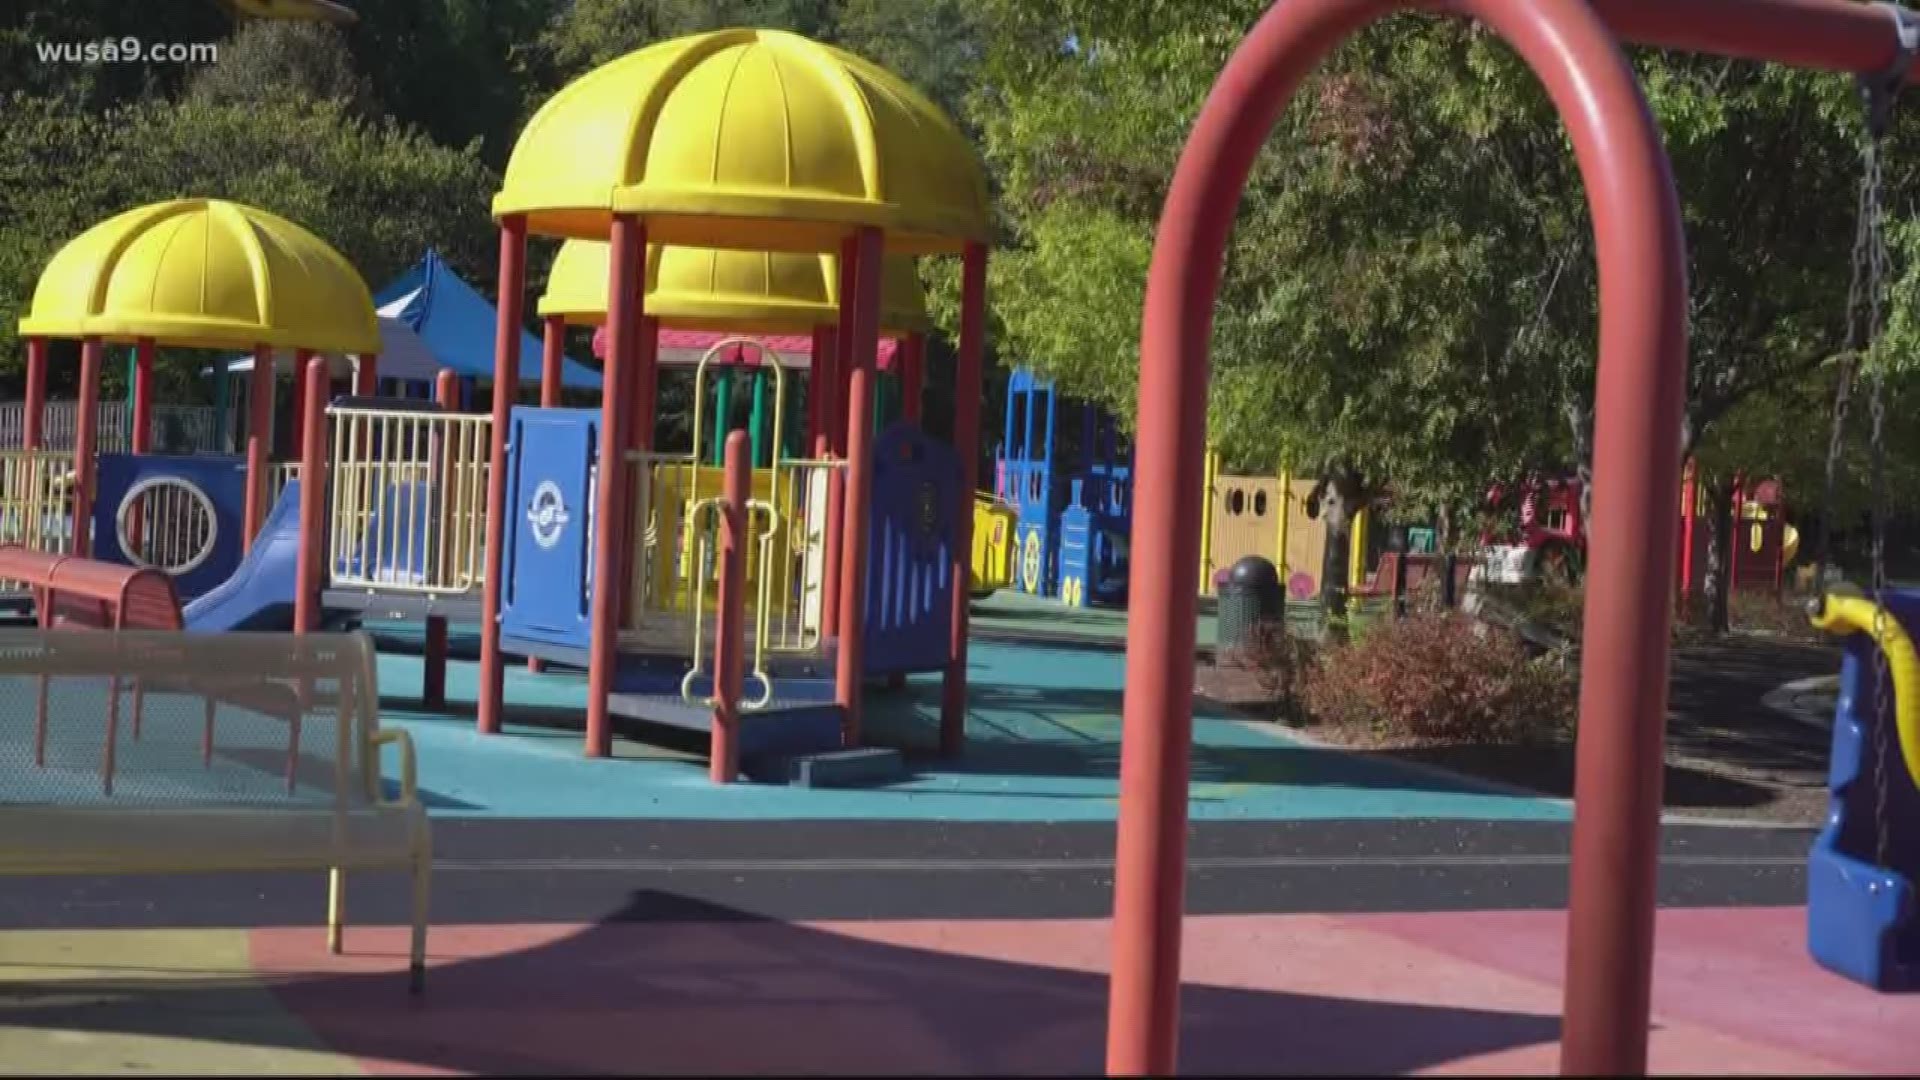 Playgrounds at Aiton & Eaton Elementary Schools, Luke C. Moore High School, and Truesdell Education Campus faced the highest lead contamination.